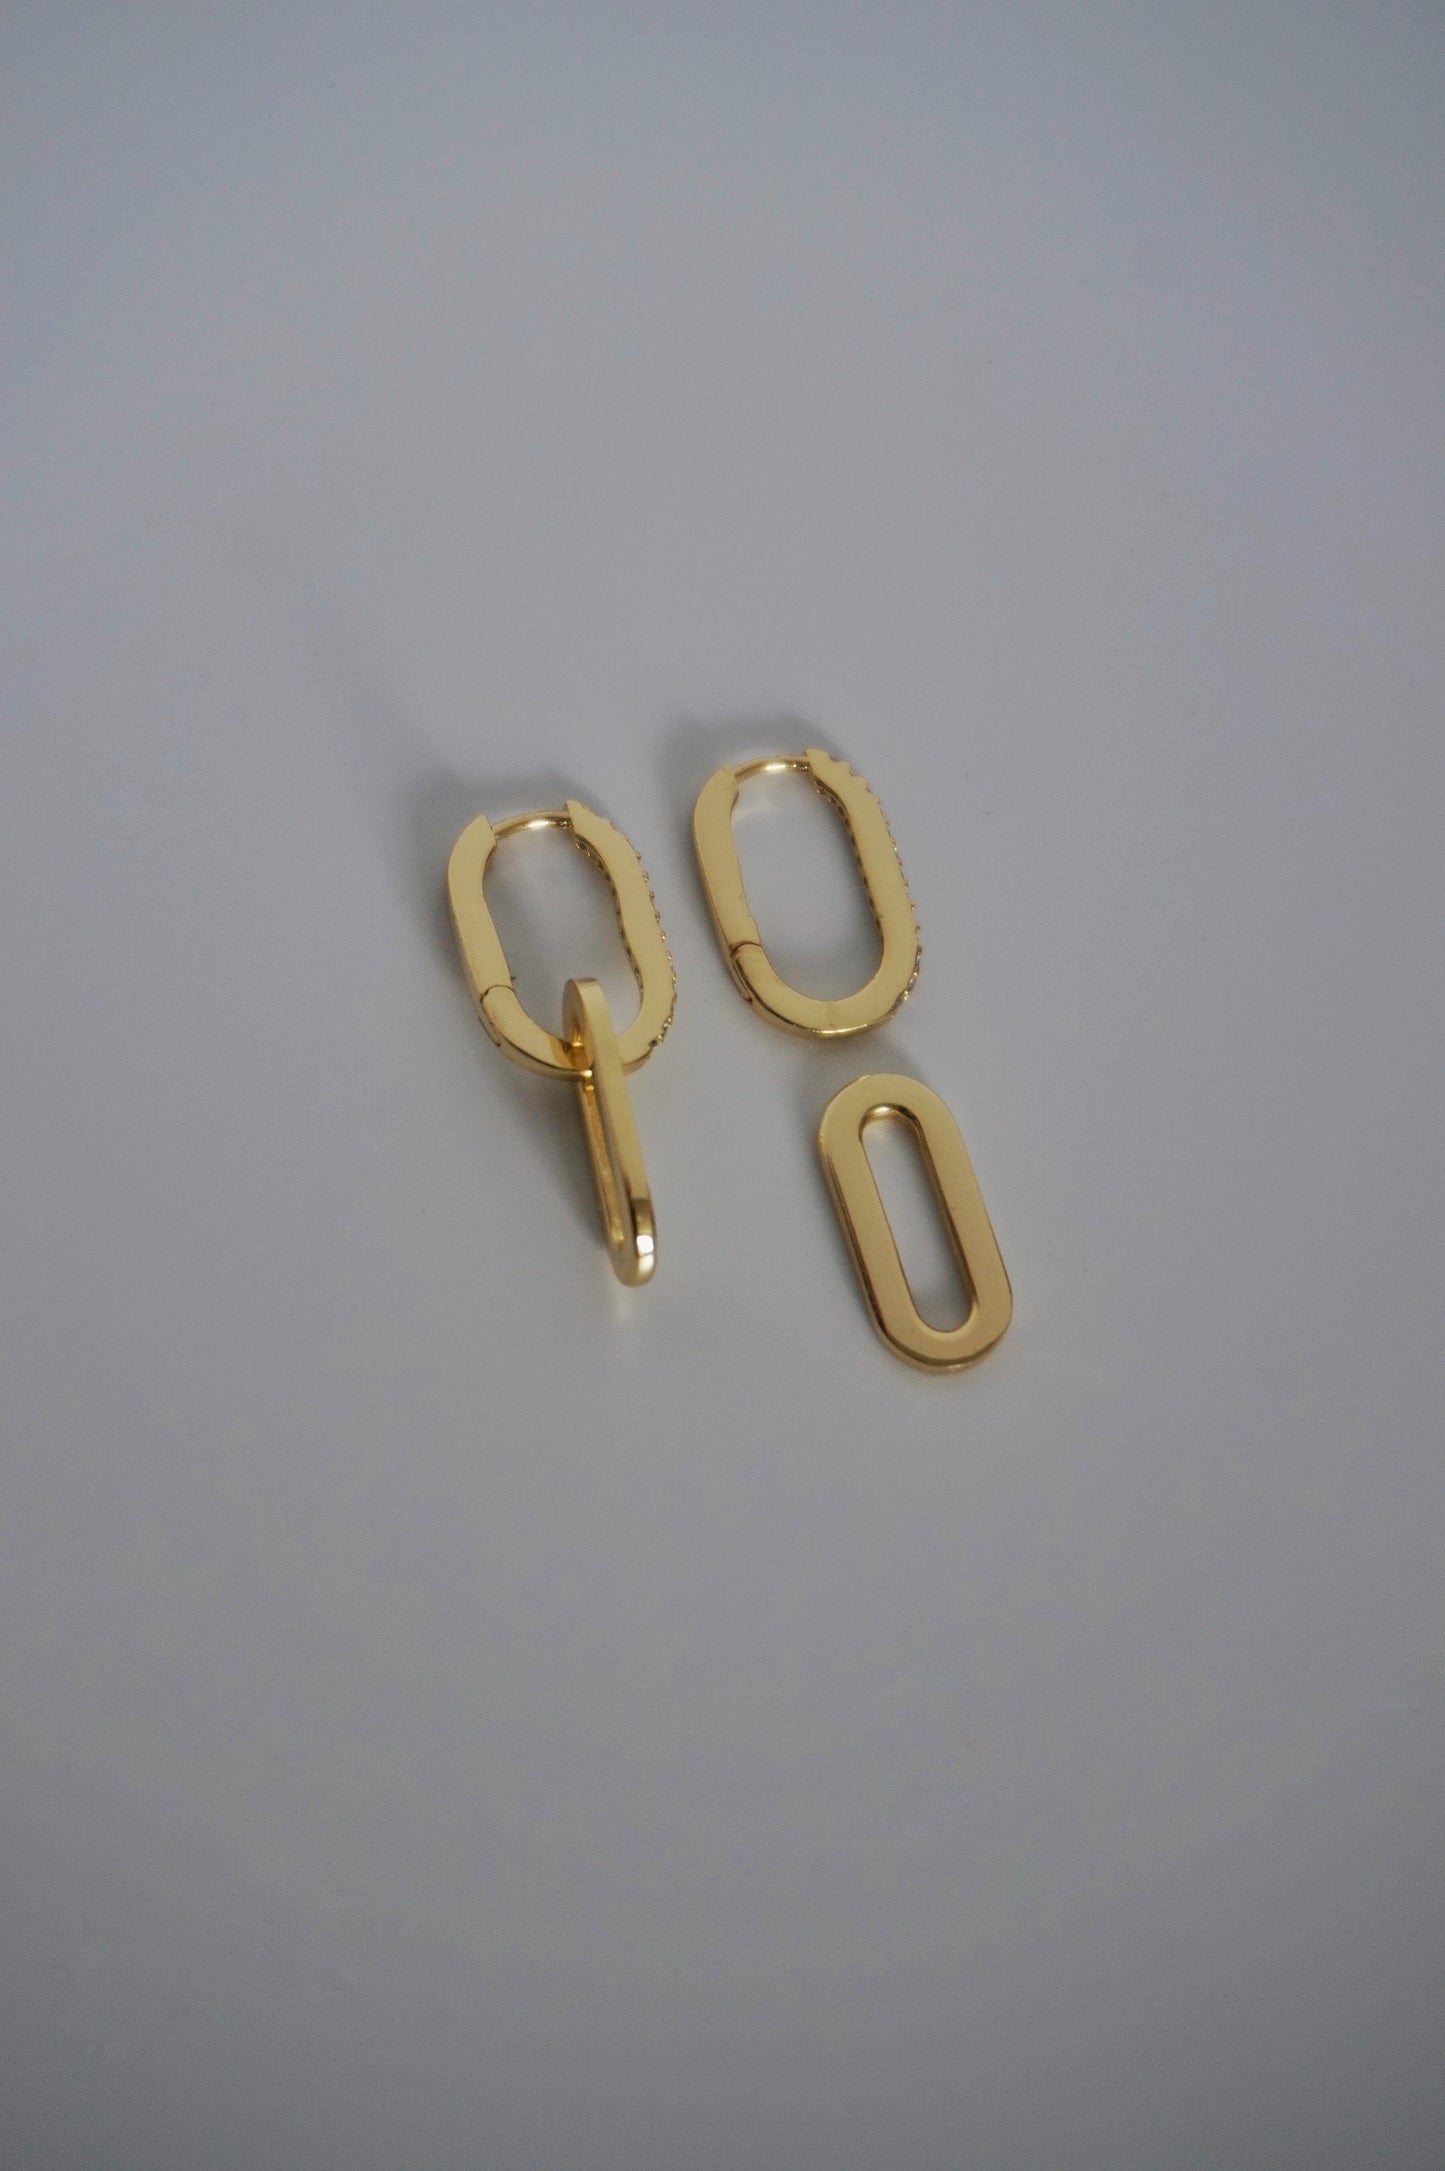 The Dainty Hoops